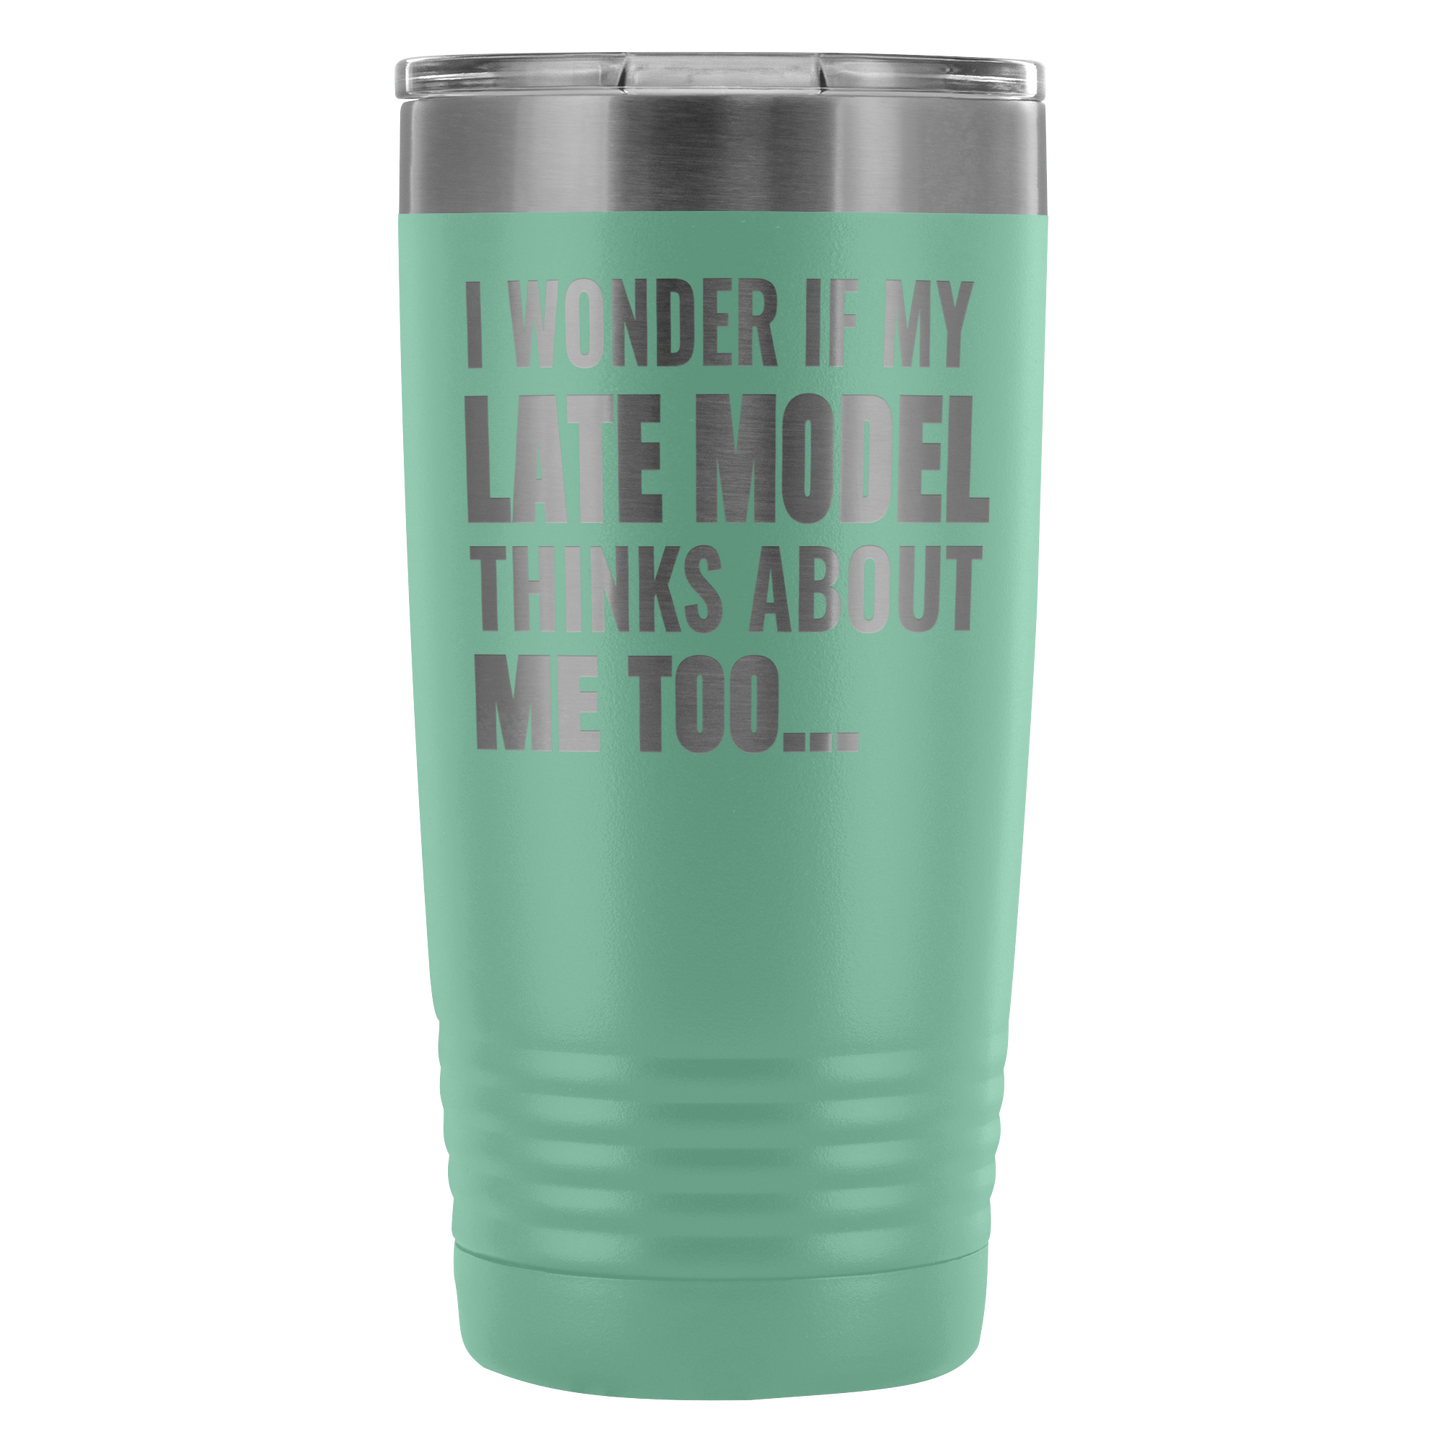 I Wonder If My Late Model Thinks About Me Too 20 Oz Travel Tumbler - Turn Left T-Shirts Racewear